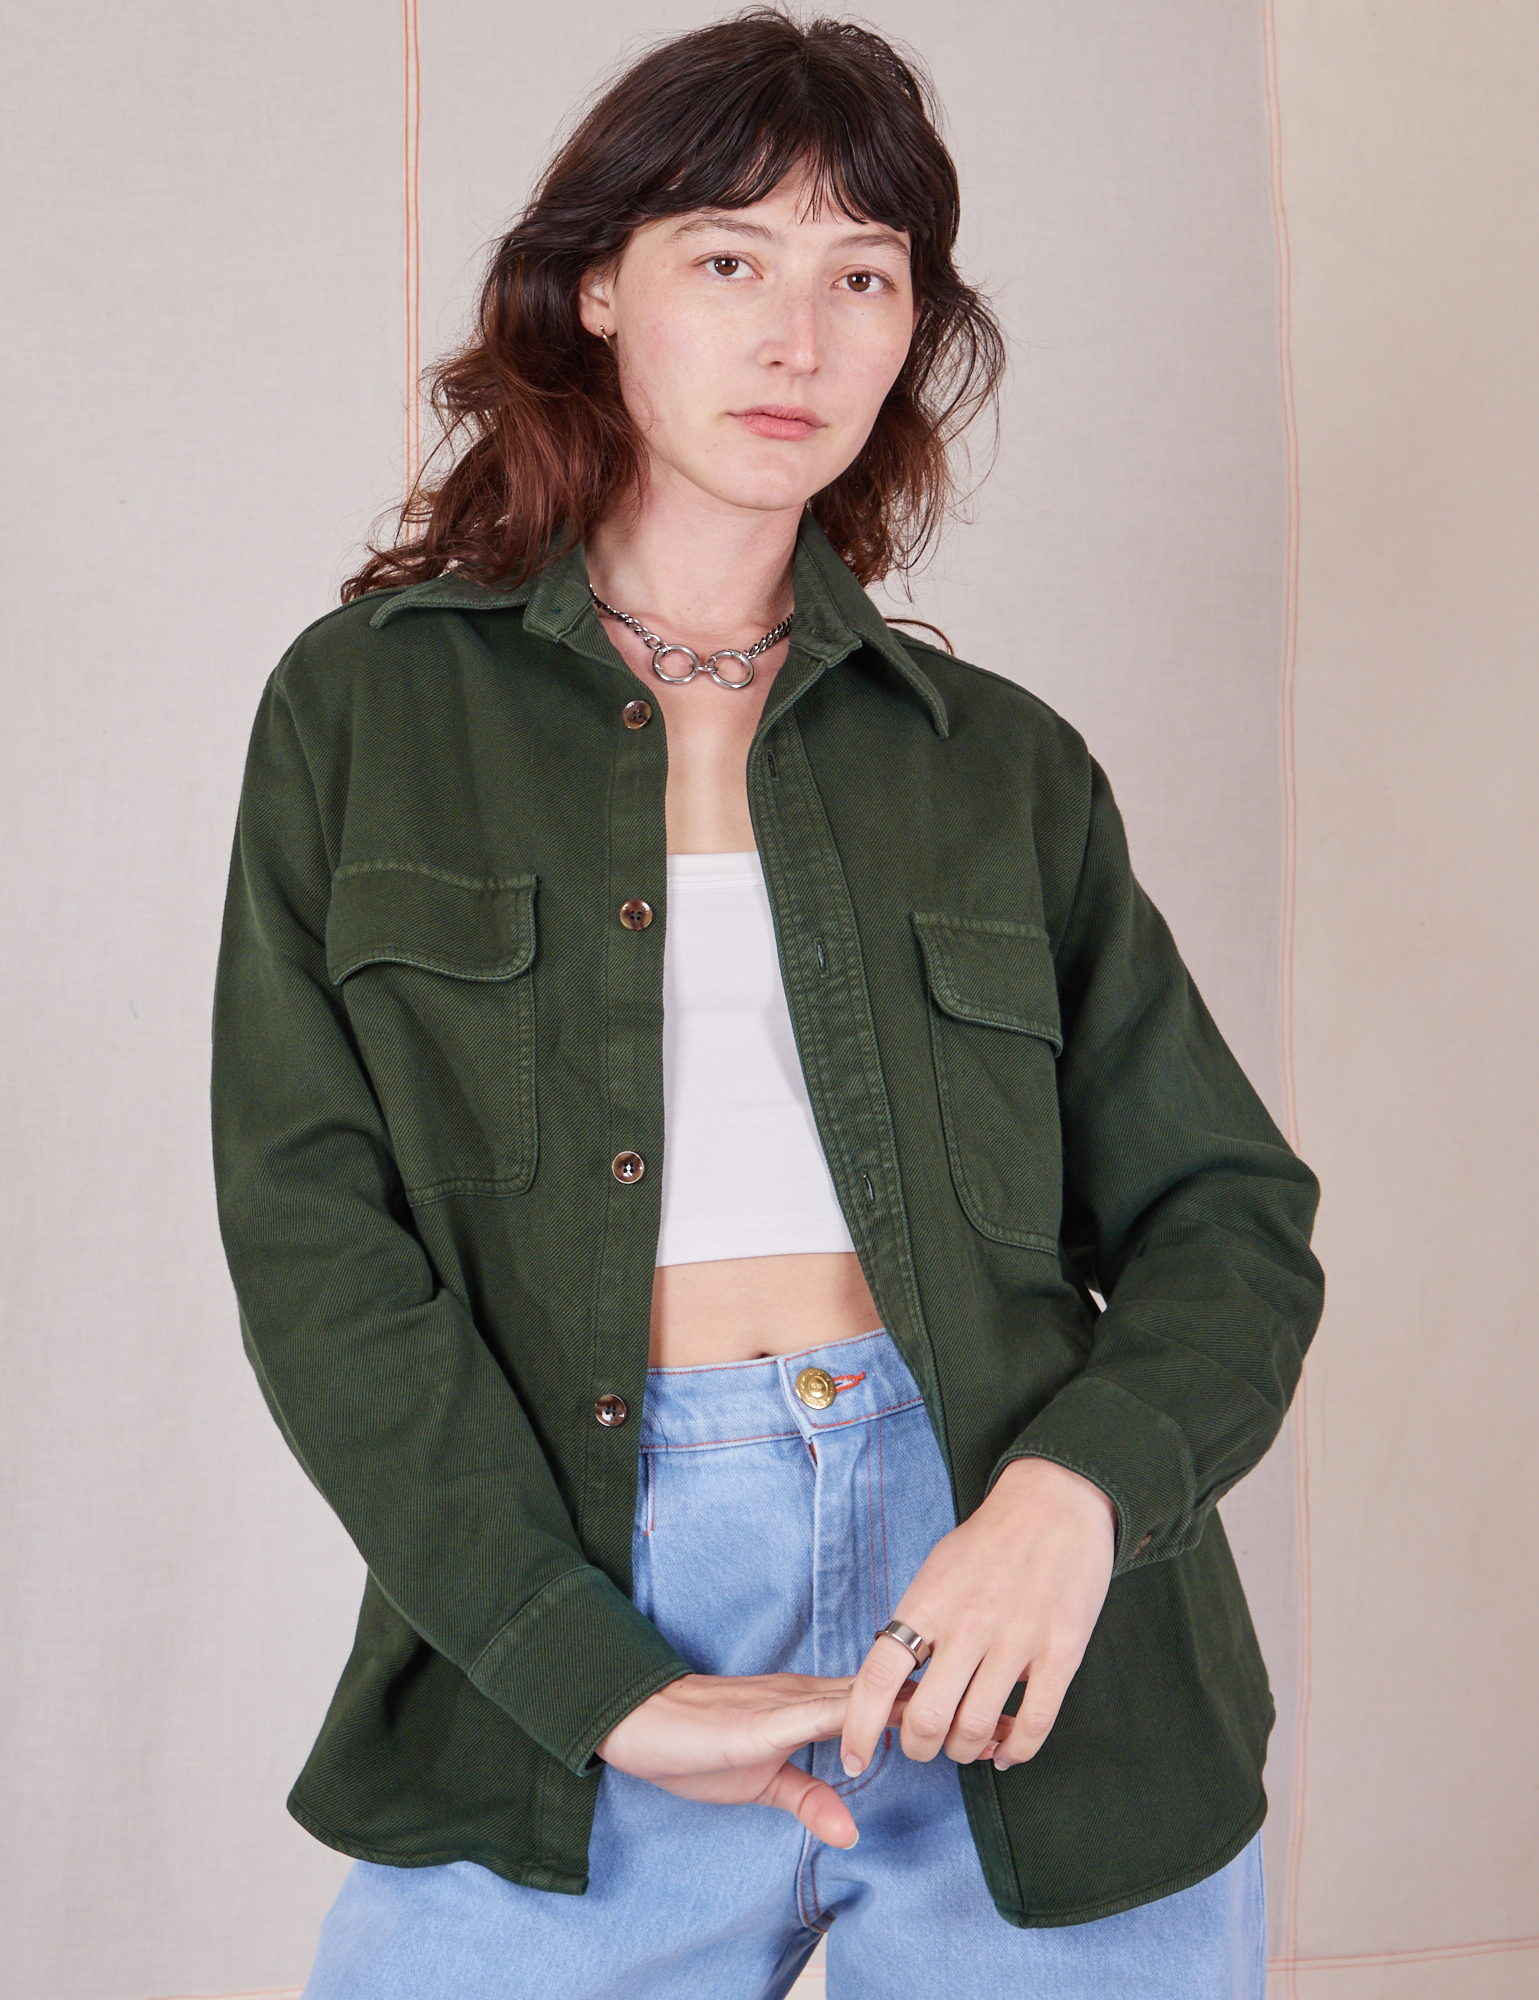 Alex is 5&#39;8&quot; and wearing P Flannel Overshirt in Swamp Green paired with vintage off-white Cropped Cami and light wash Trouser Jeans